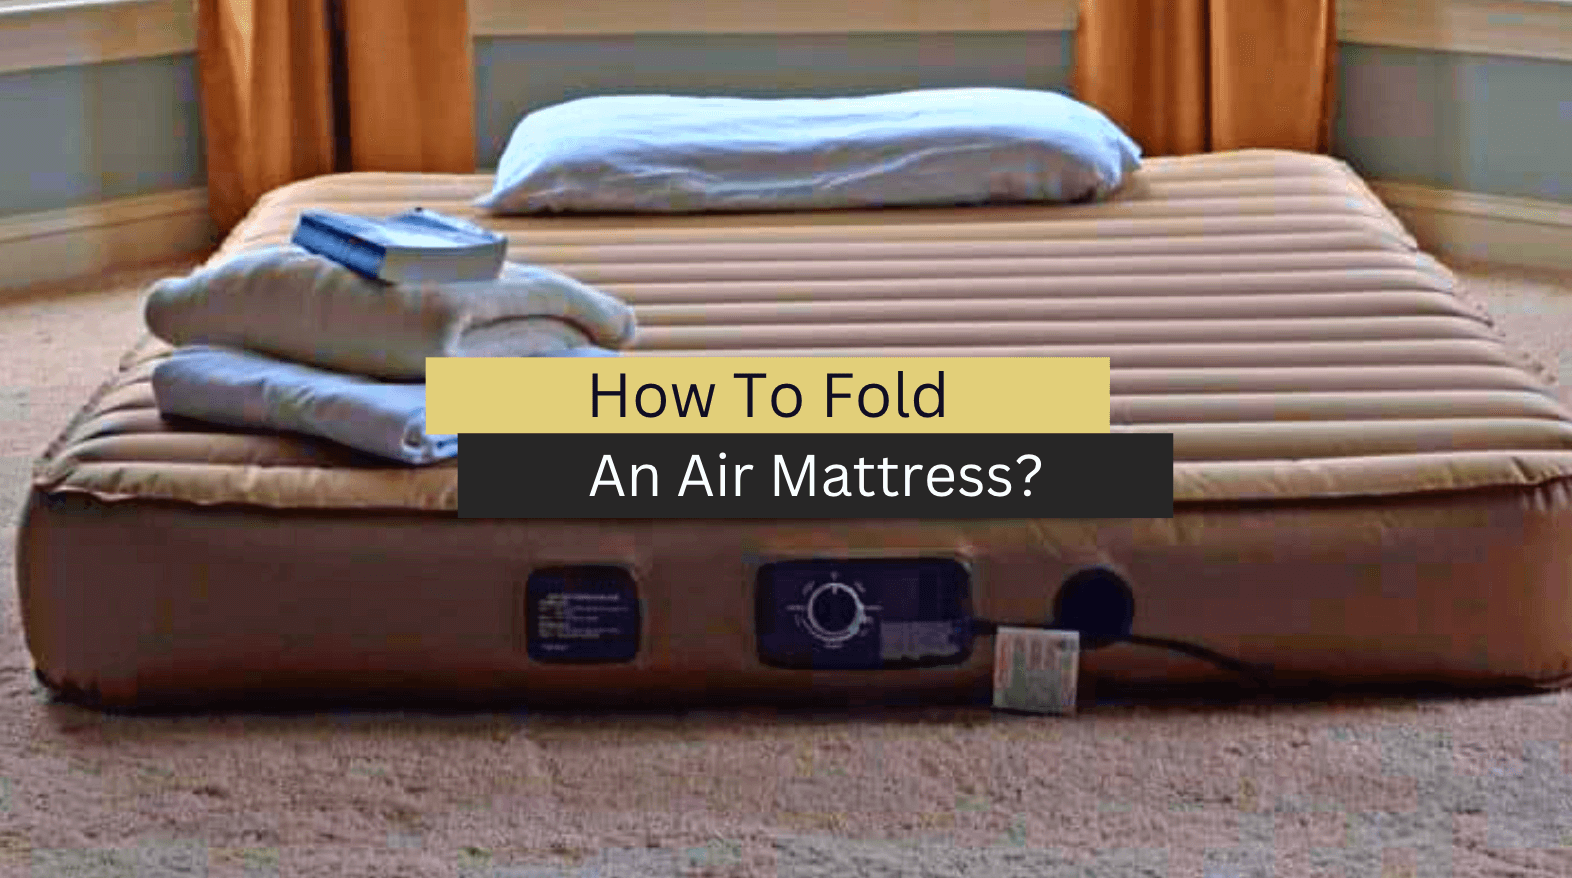 How To Fold An Air Mattress? (A Step-By-Step Guide)